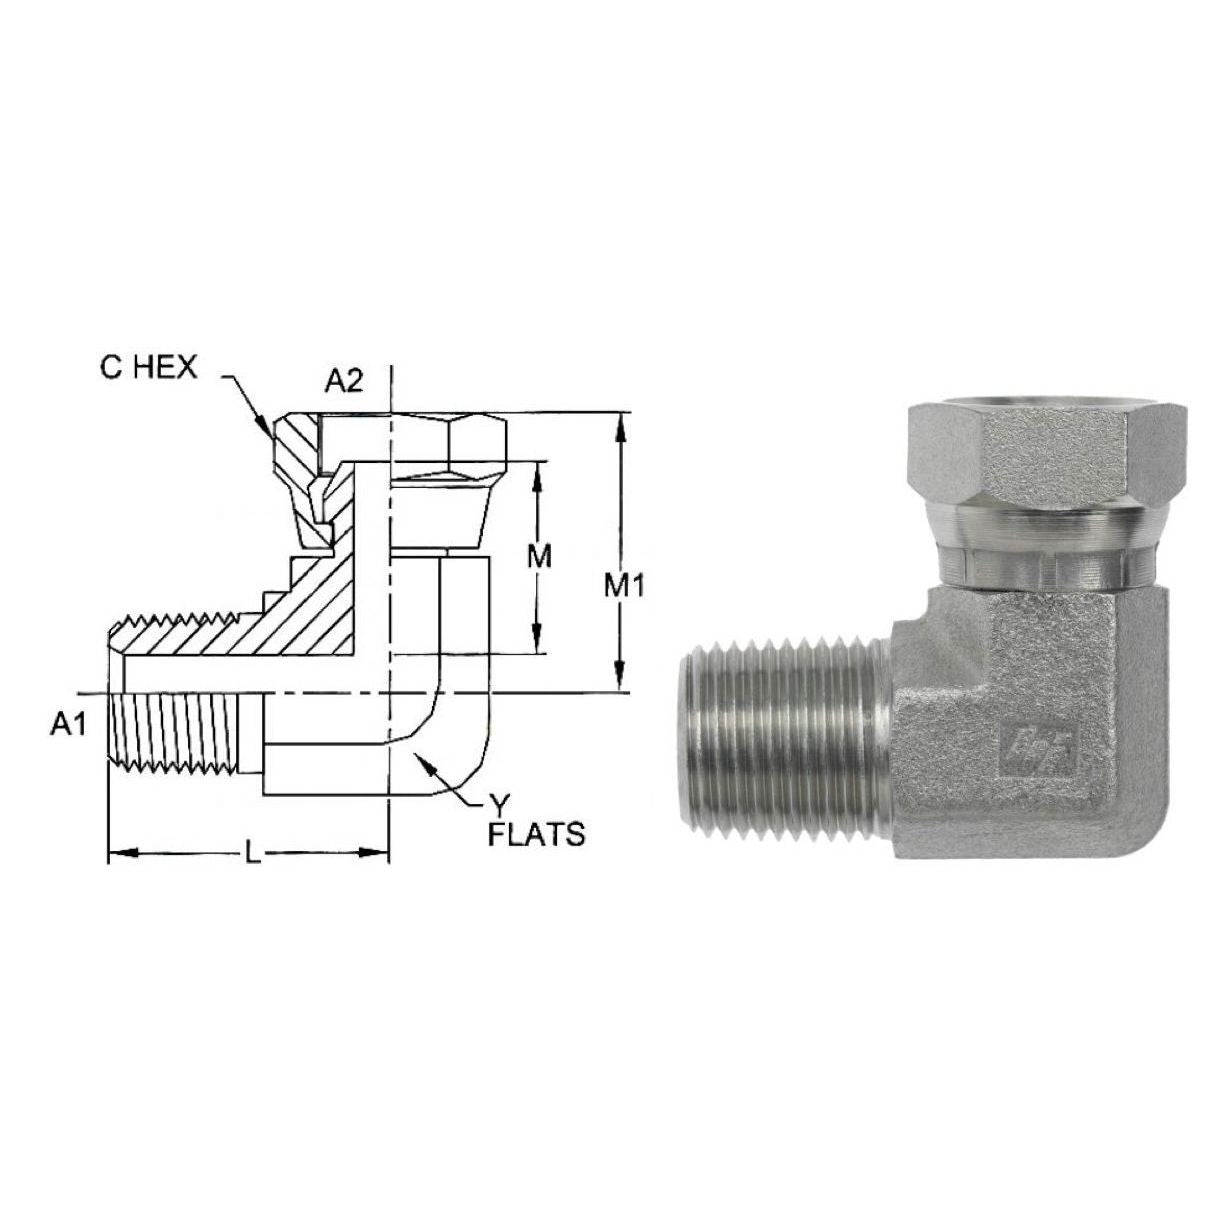 1501-04-06-SS : OneHydraulics 90-Degree Elbow, 0.25 (1/4) Male NPT x 0.375 (3/8) Female NPT Swivel, Stainless Steel, 4800psi